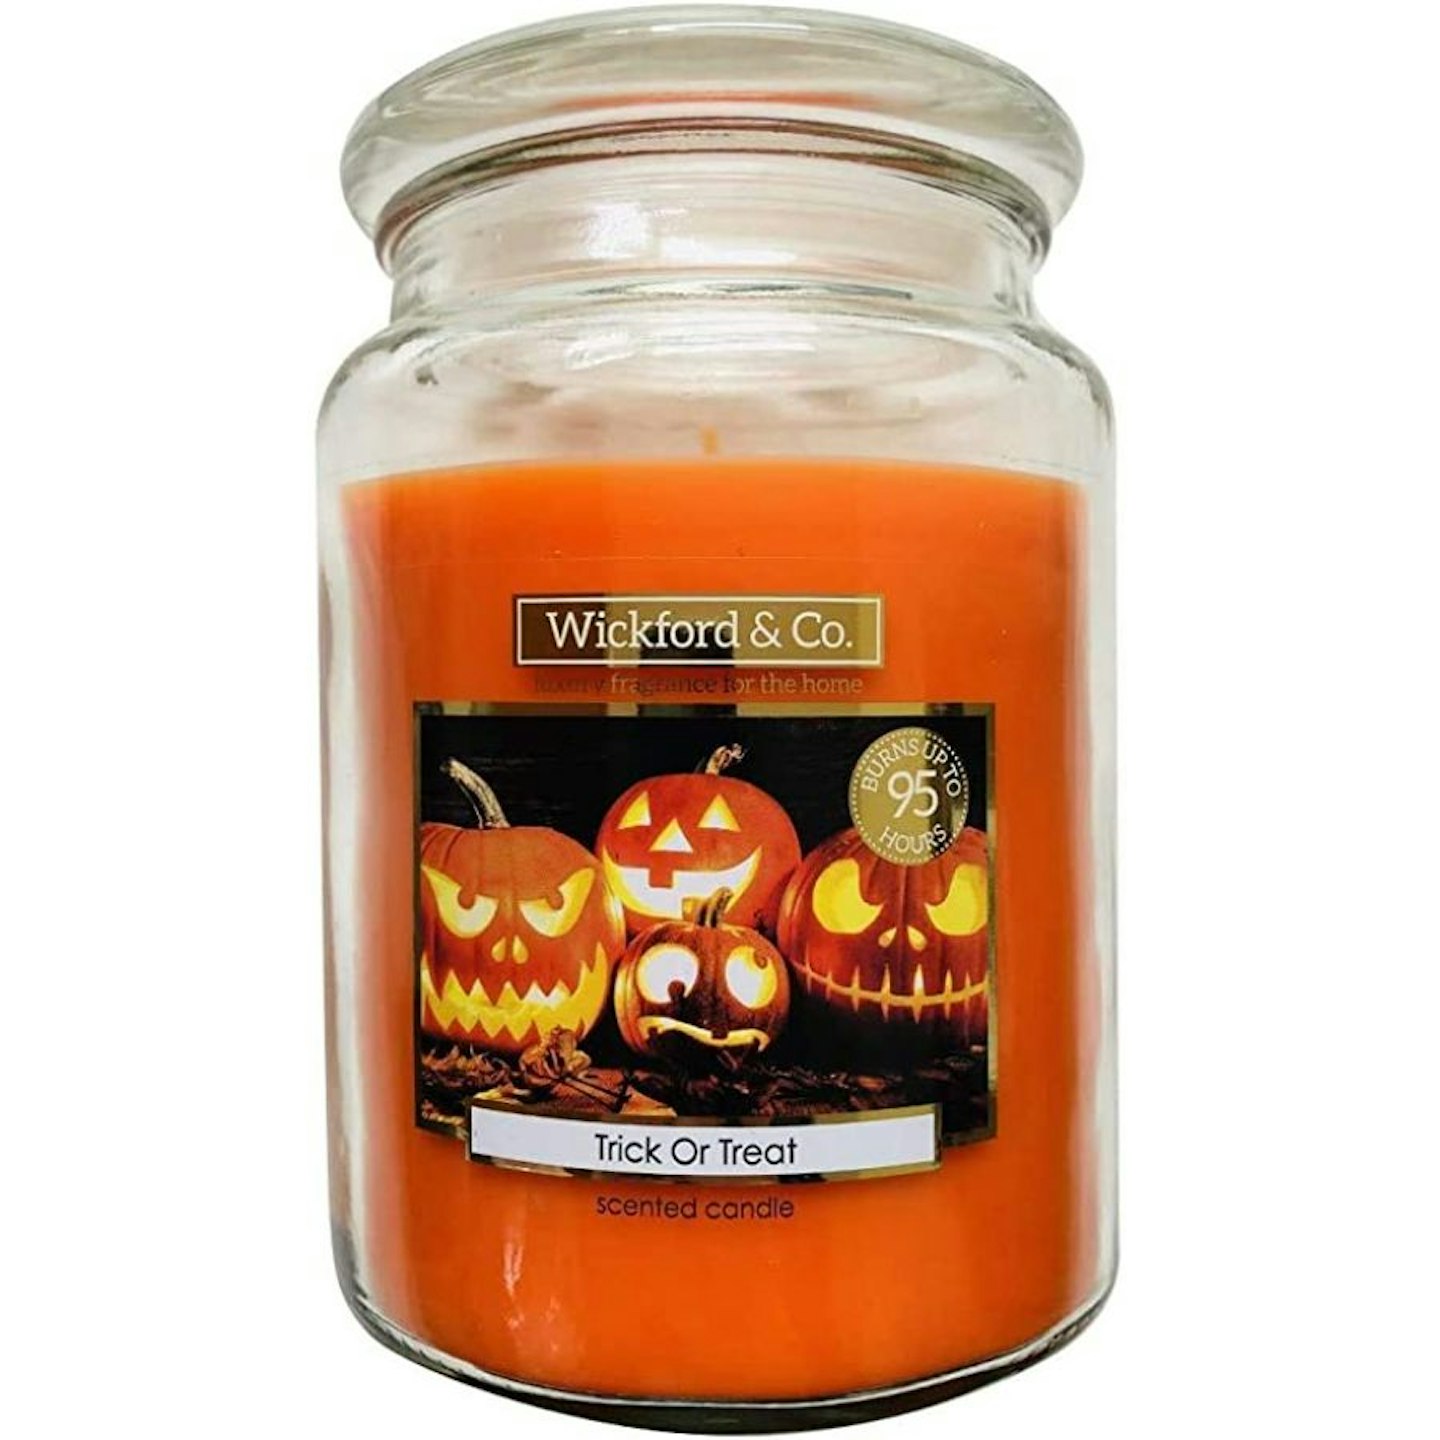 Wickford & Co. Large Halloween Scented Candle - Trick Or Treat